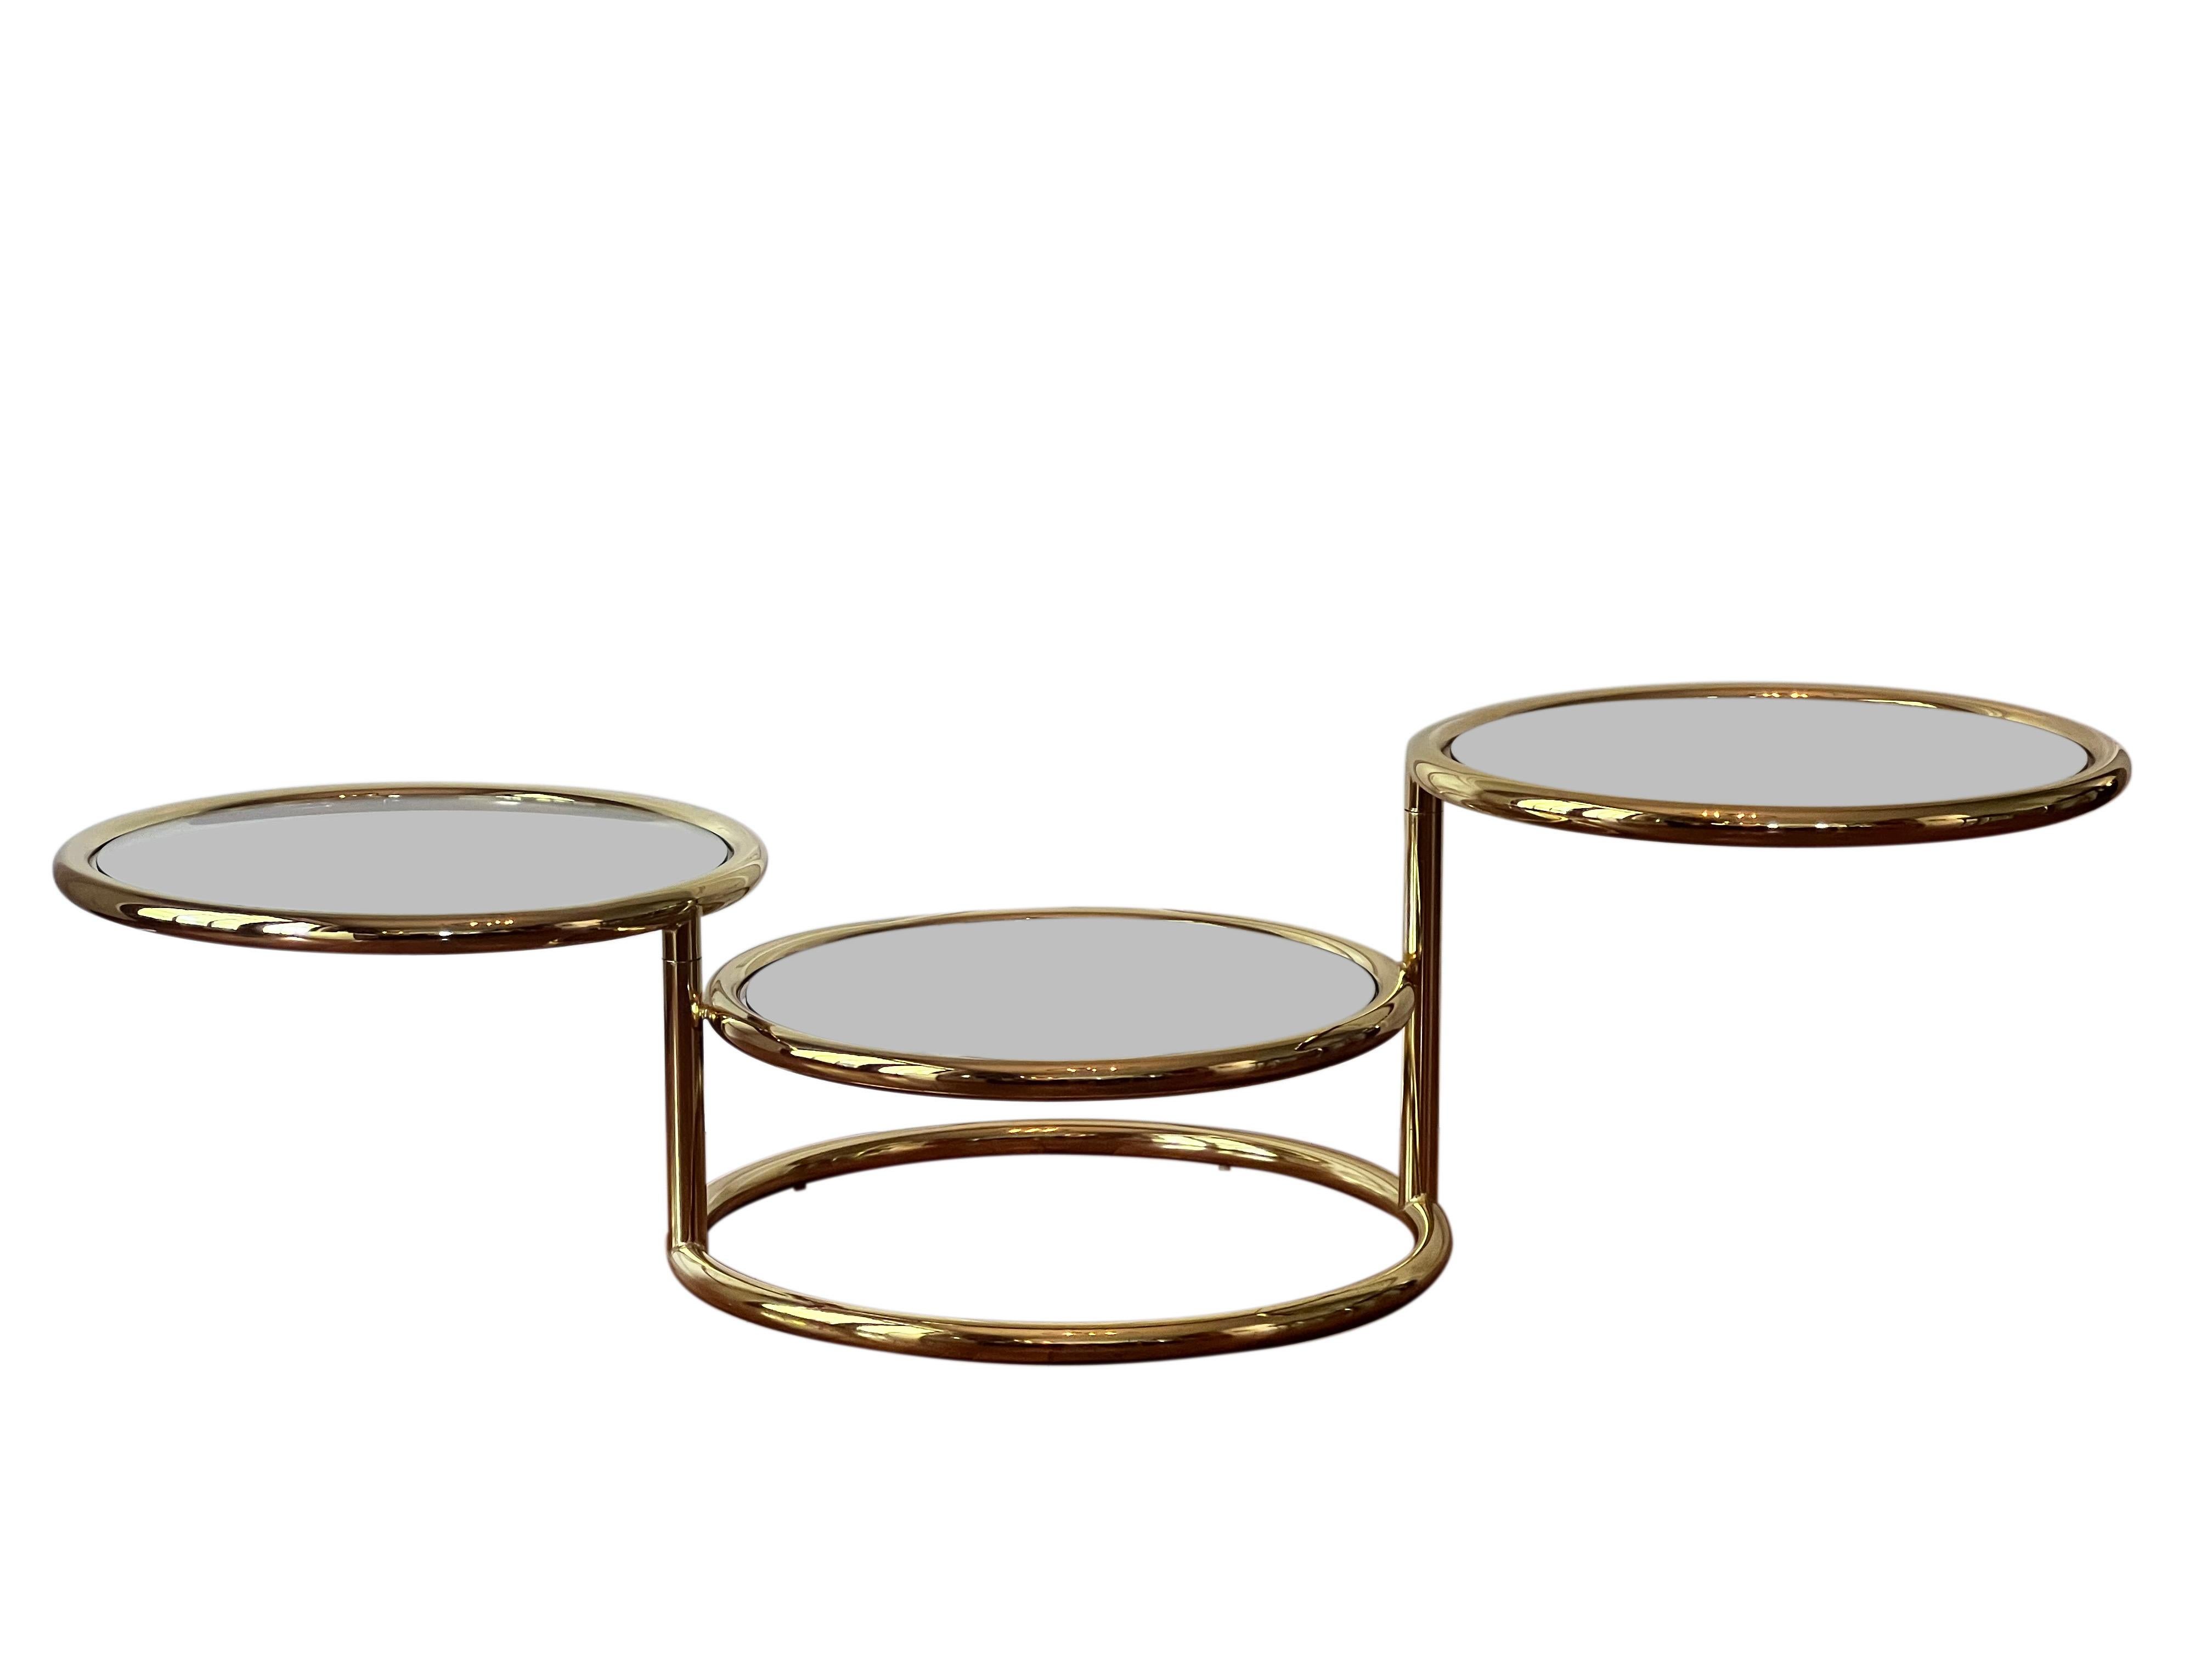 Gorgeous three-tier swivel coffee table with a high shine brass finish in the style of Milo Baughman, 1970's. 

An endlessly versatile table, the top two tiers smoothly swivel to create desired position allowing for a multitude of configurations